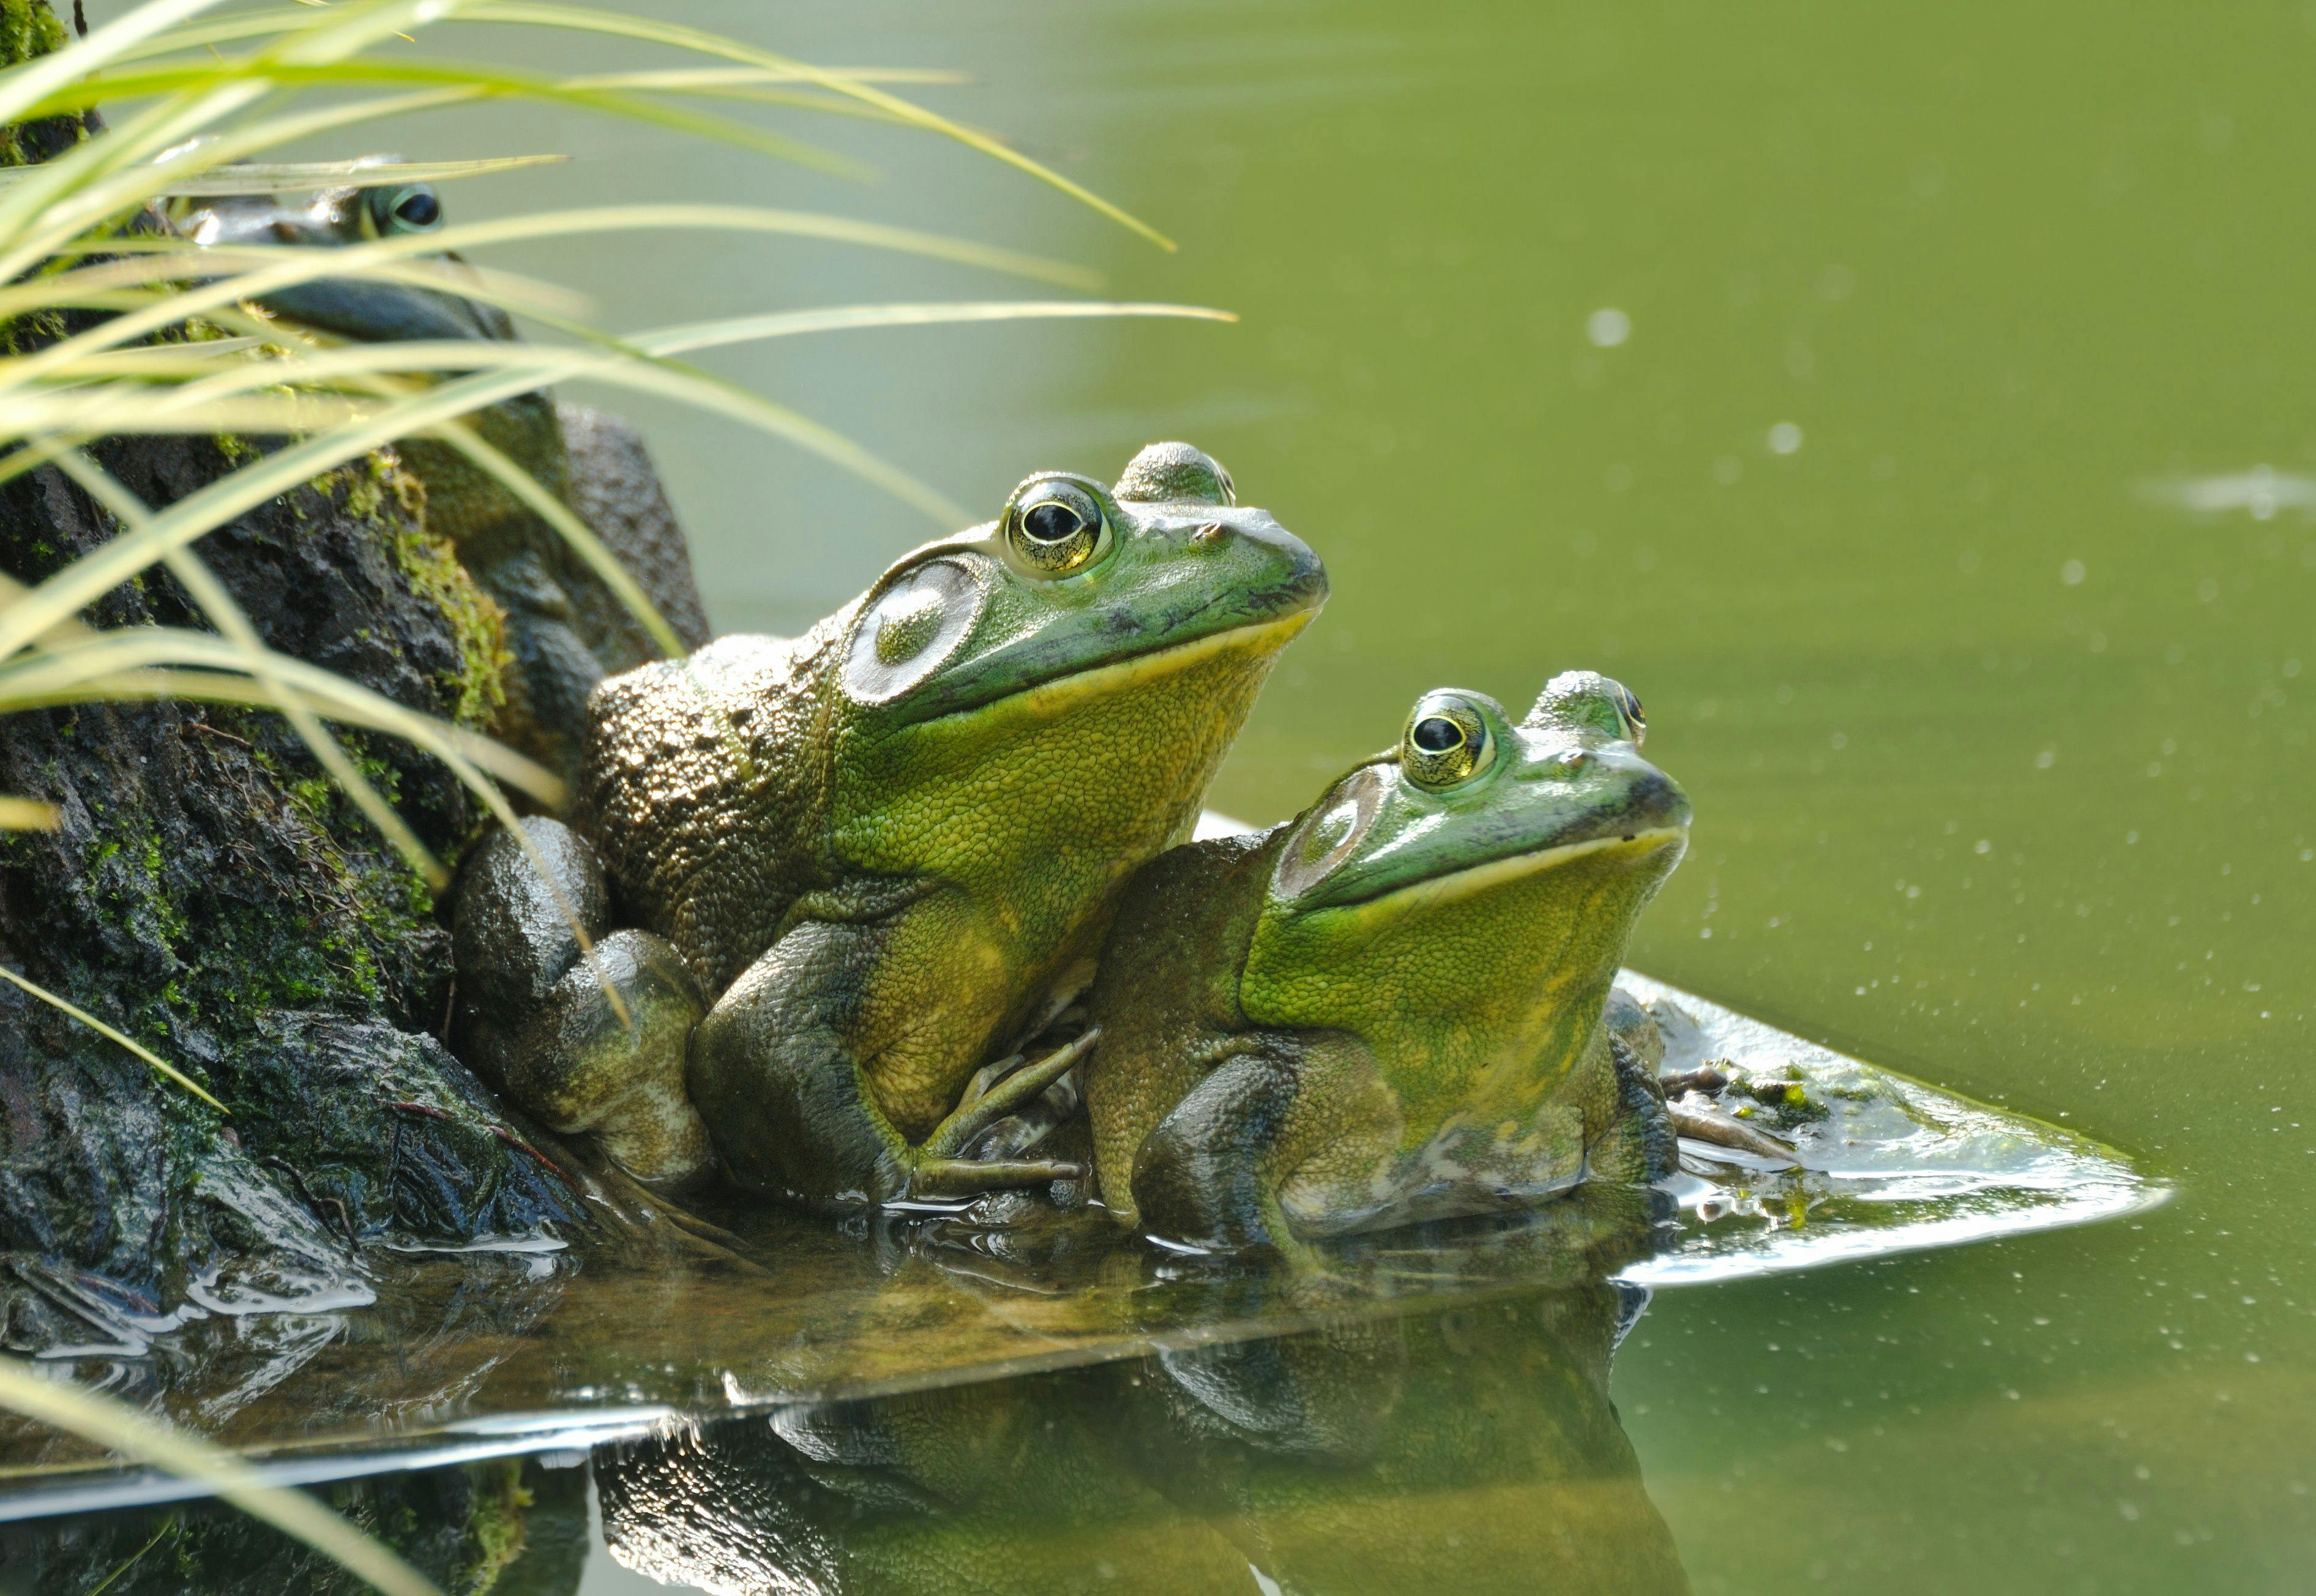 Morris Animal Foundation and Revive & Restore team up to support amphibian life